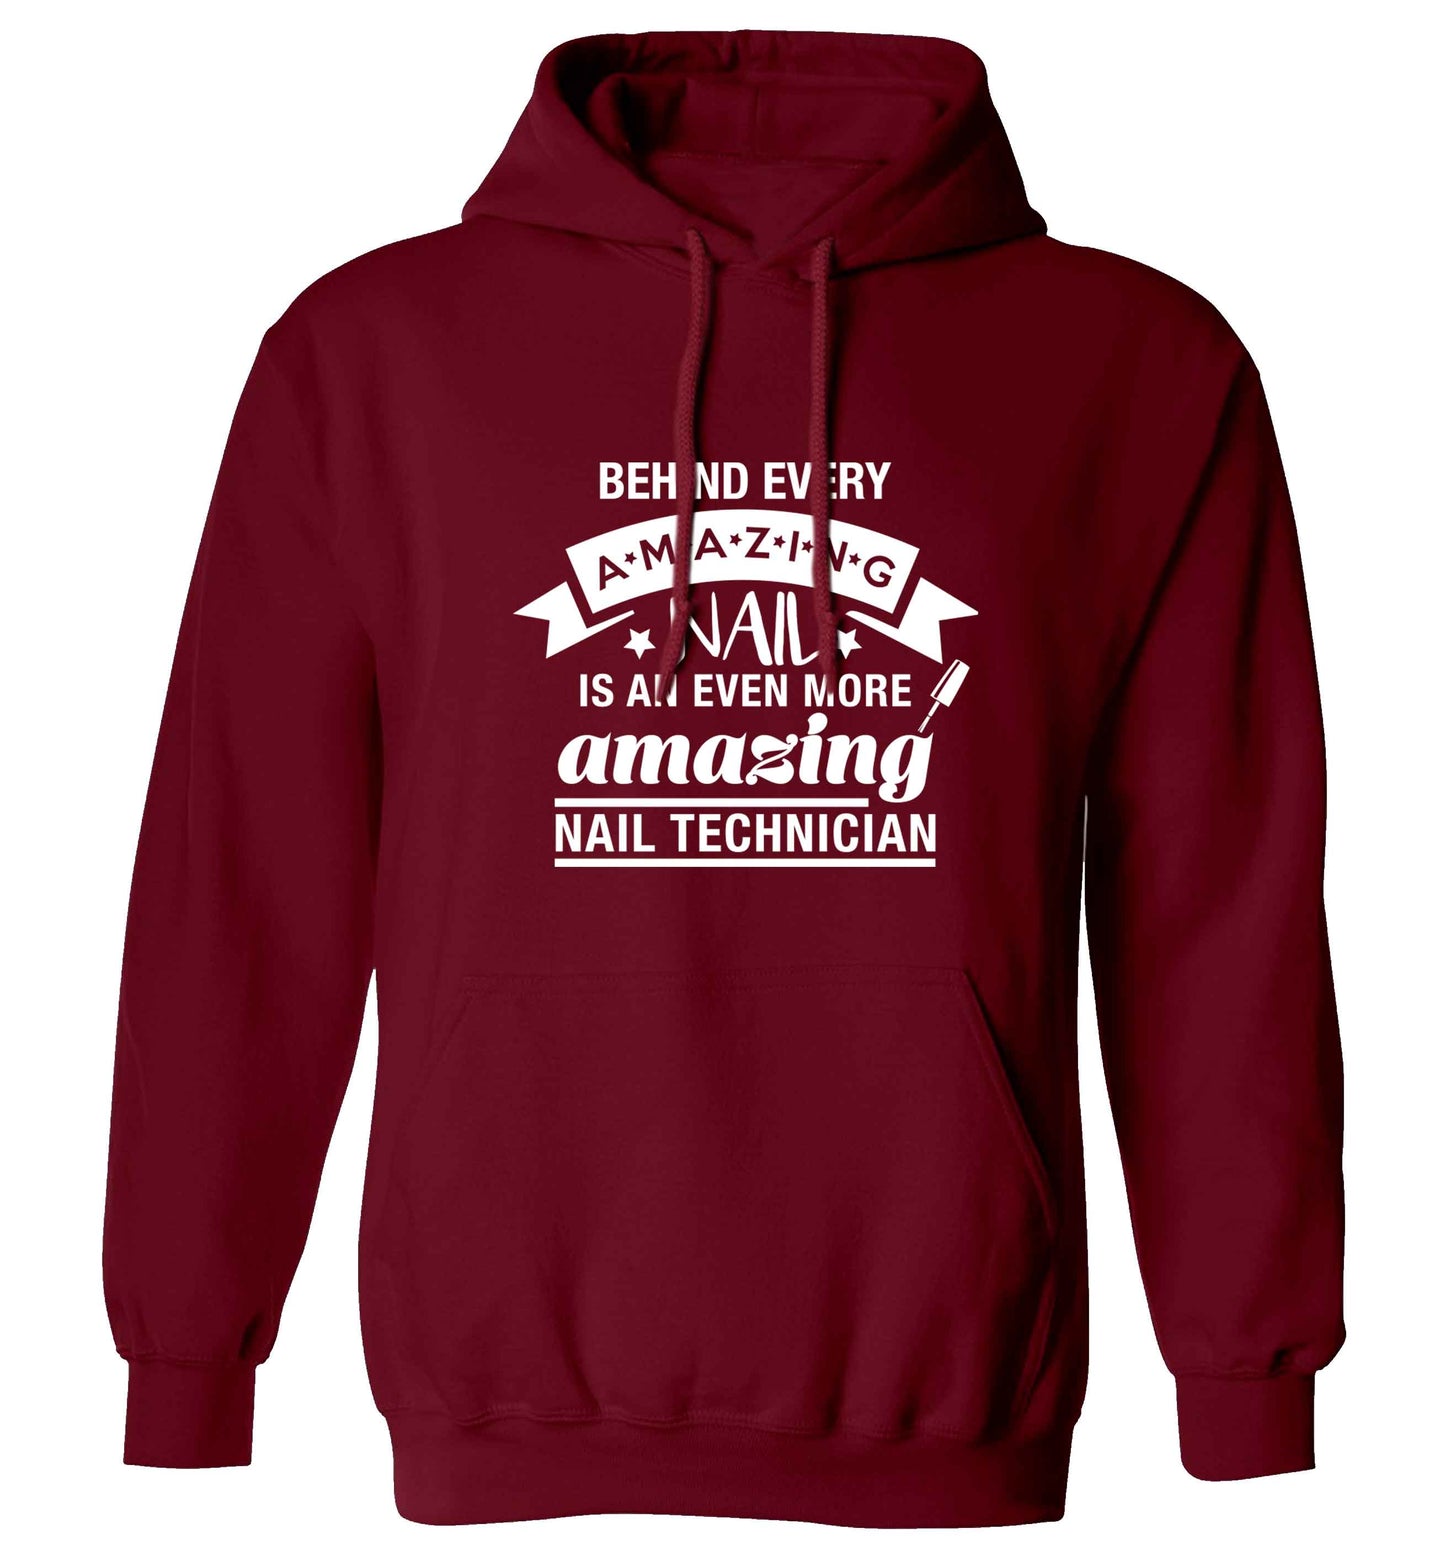 Behind every amazing nail is an even more amazing nail technician adults unisex maroon hoodie 2XL